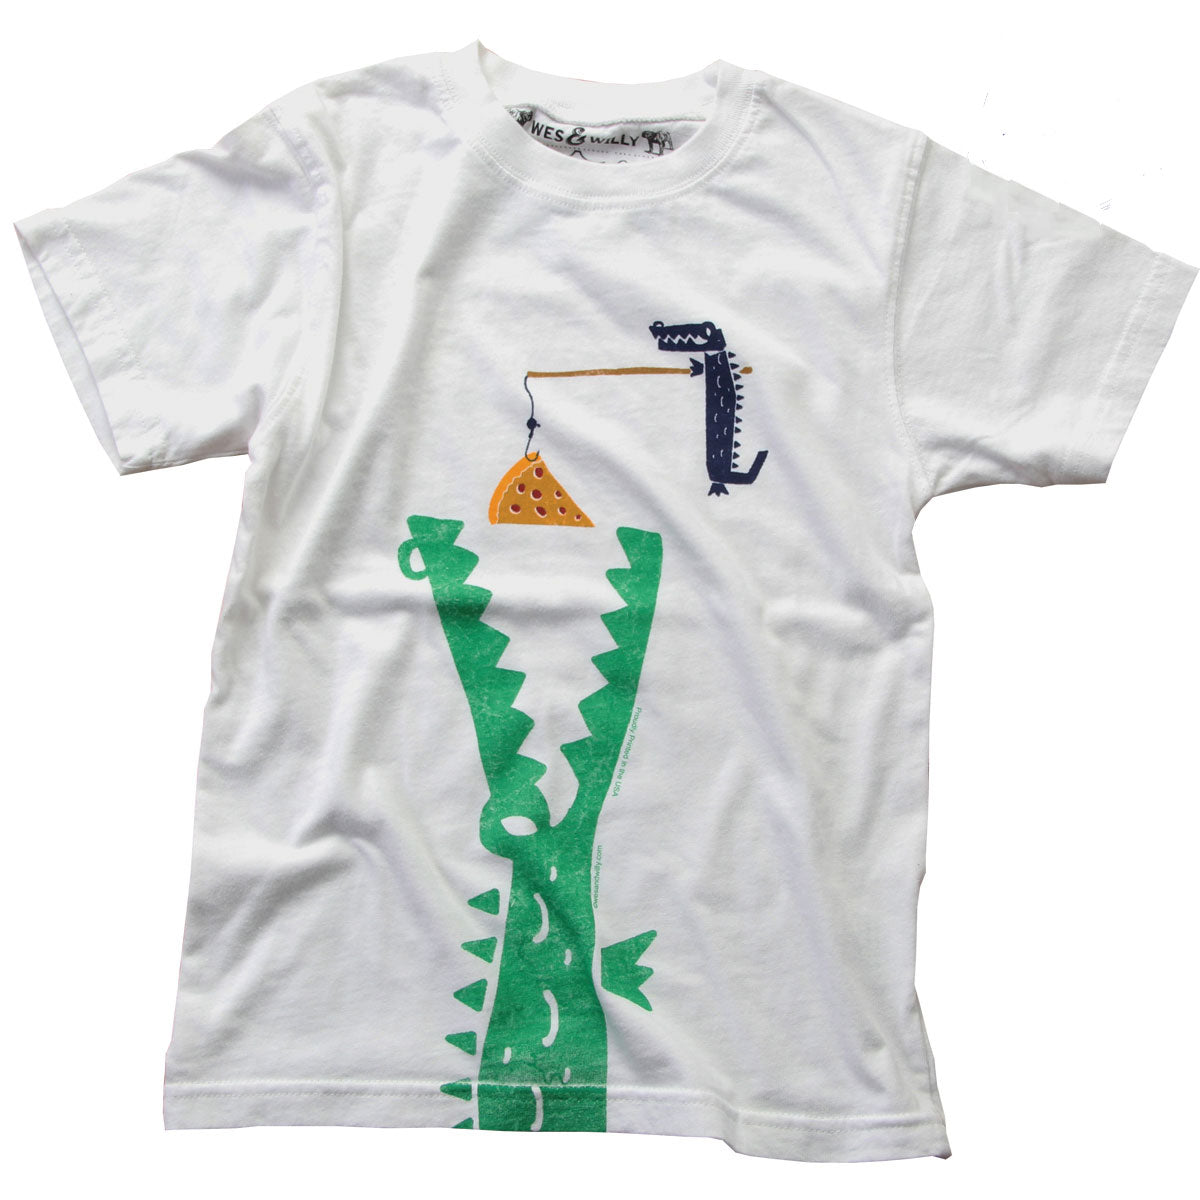 Boys' Hungry Gator Shirt by Wes and Willy